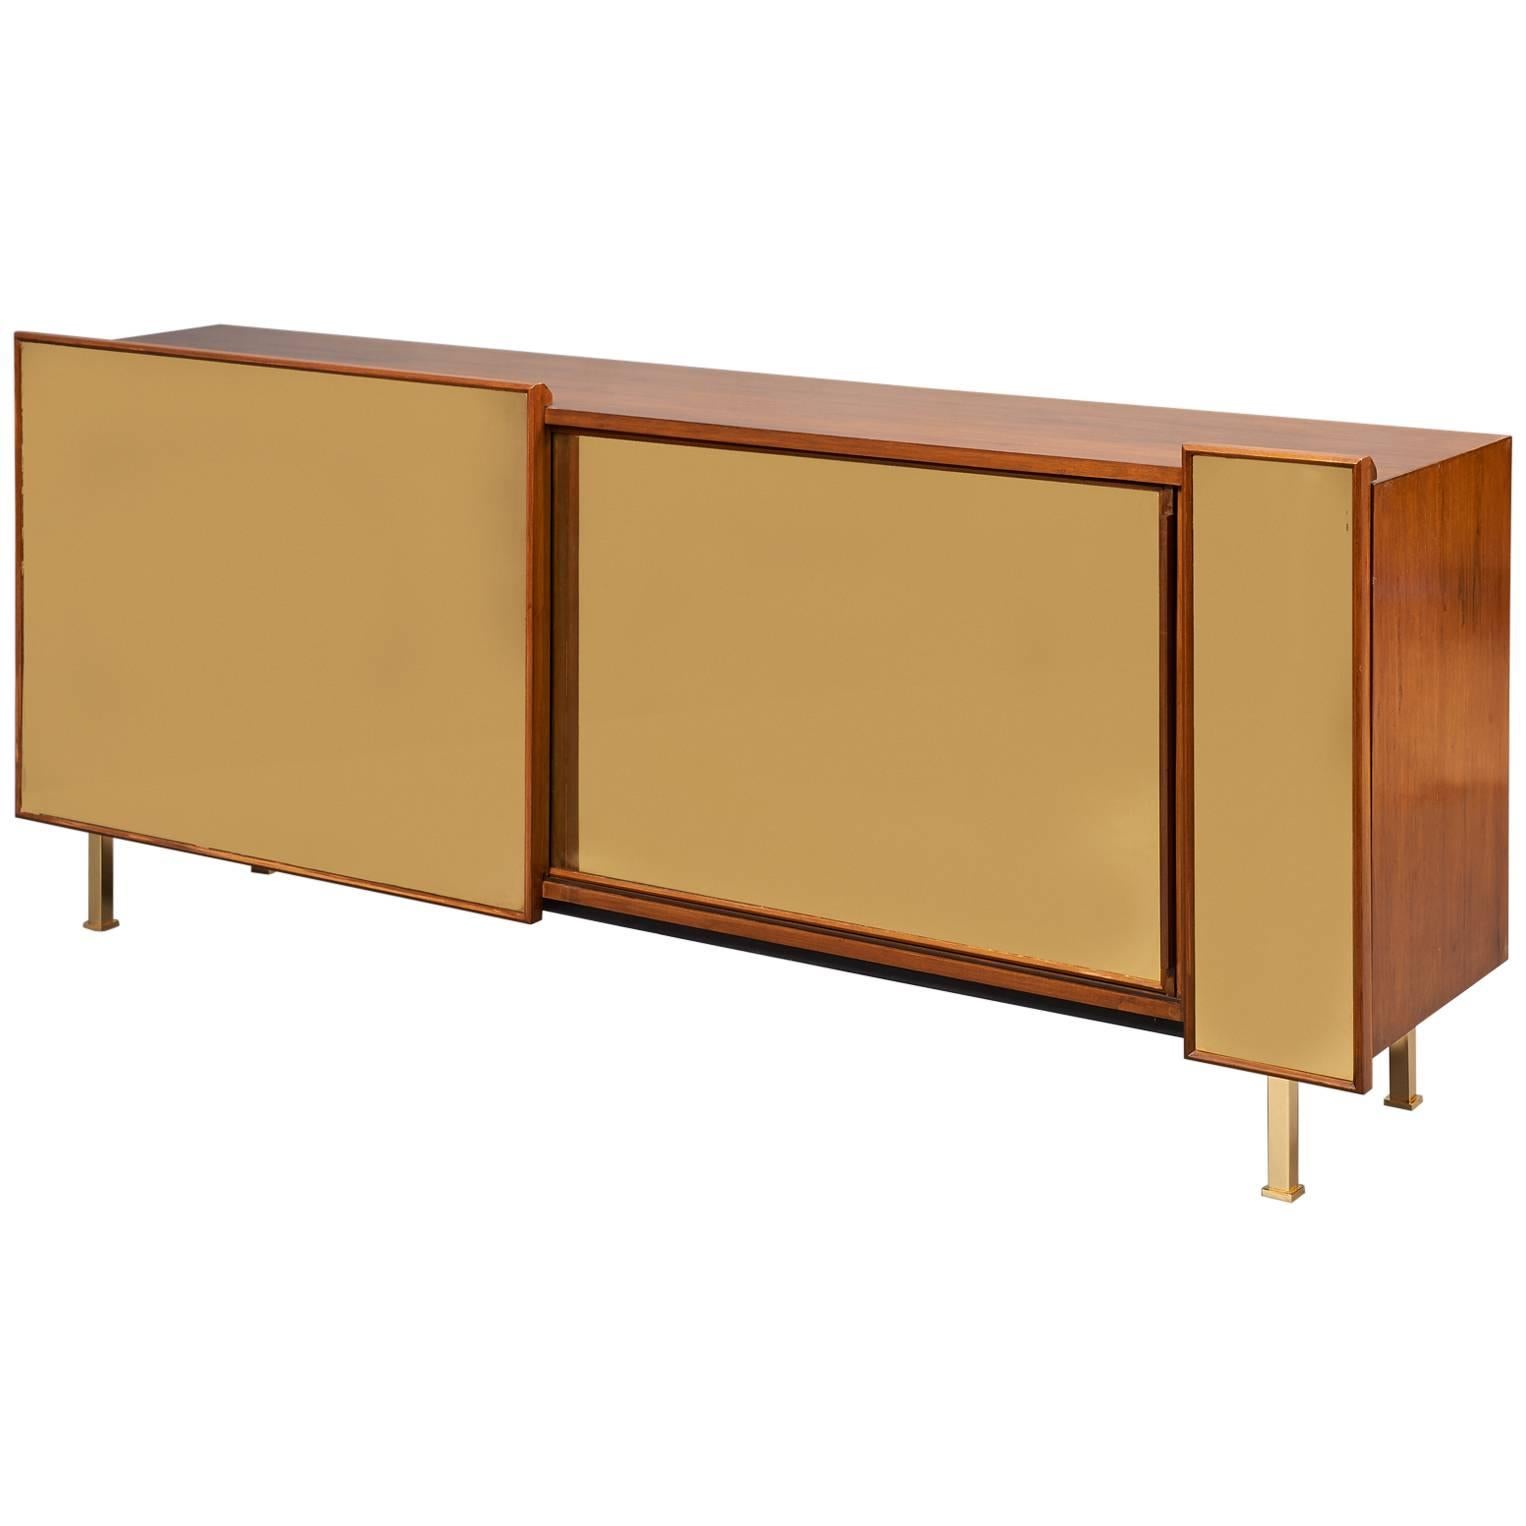 Architectural Asymmetrical Cabinet in Reflective Polished Brass, France, 1970s